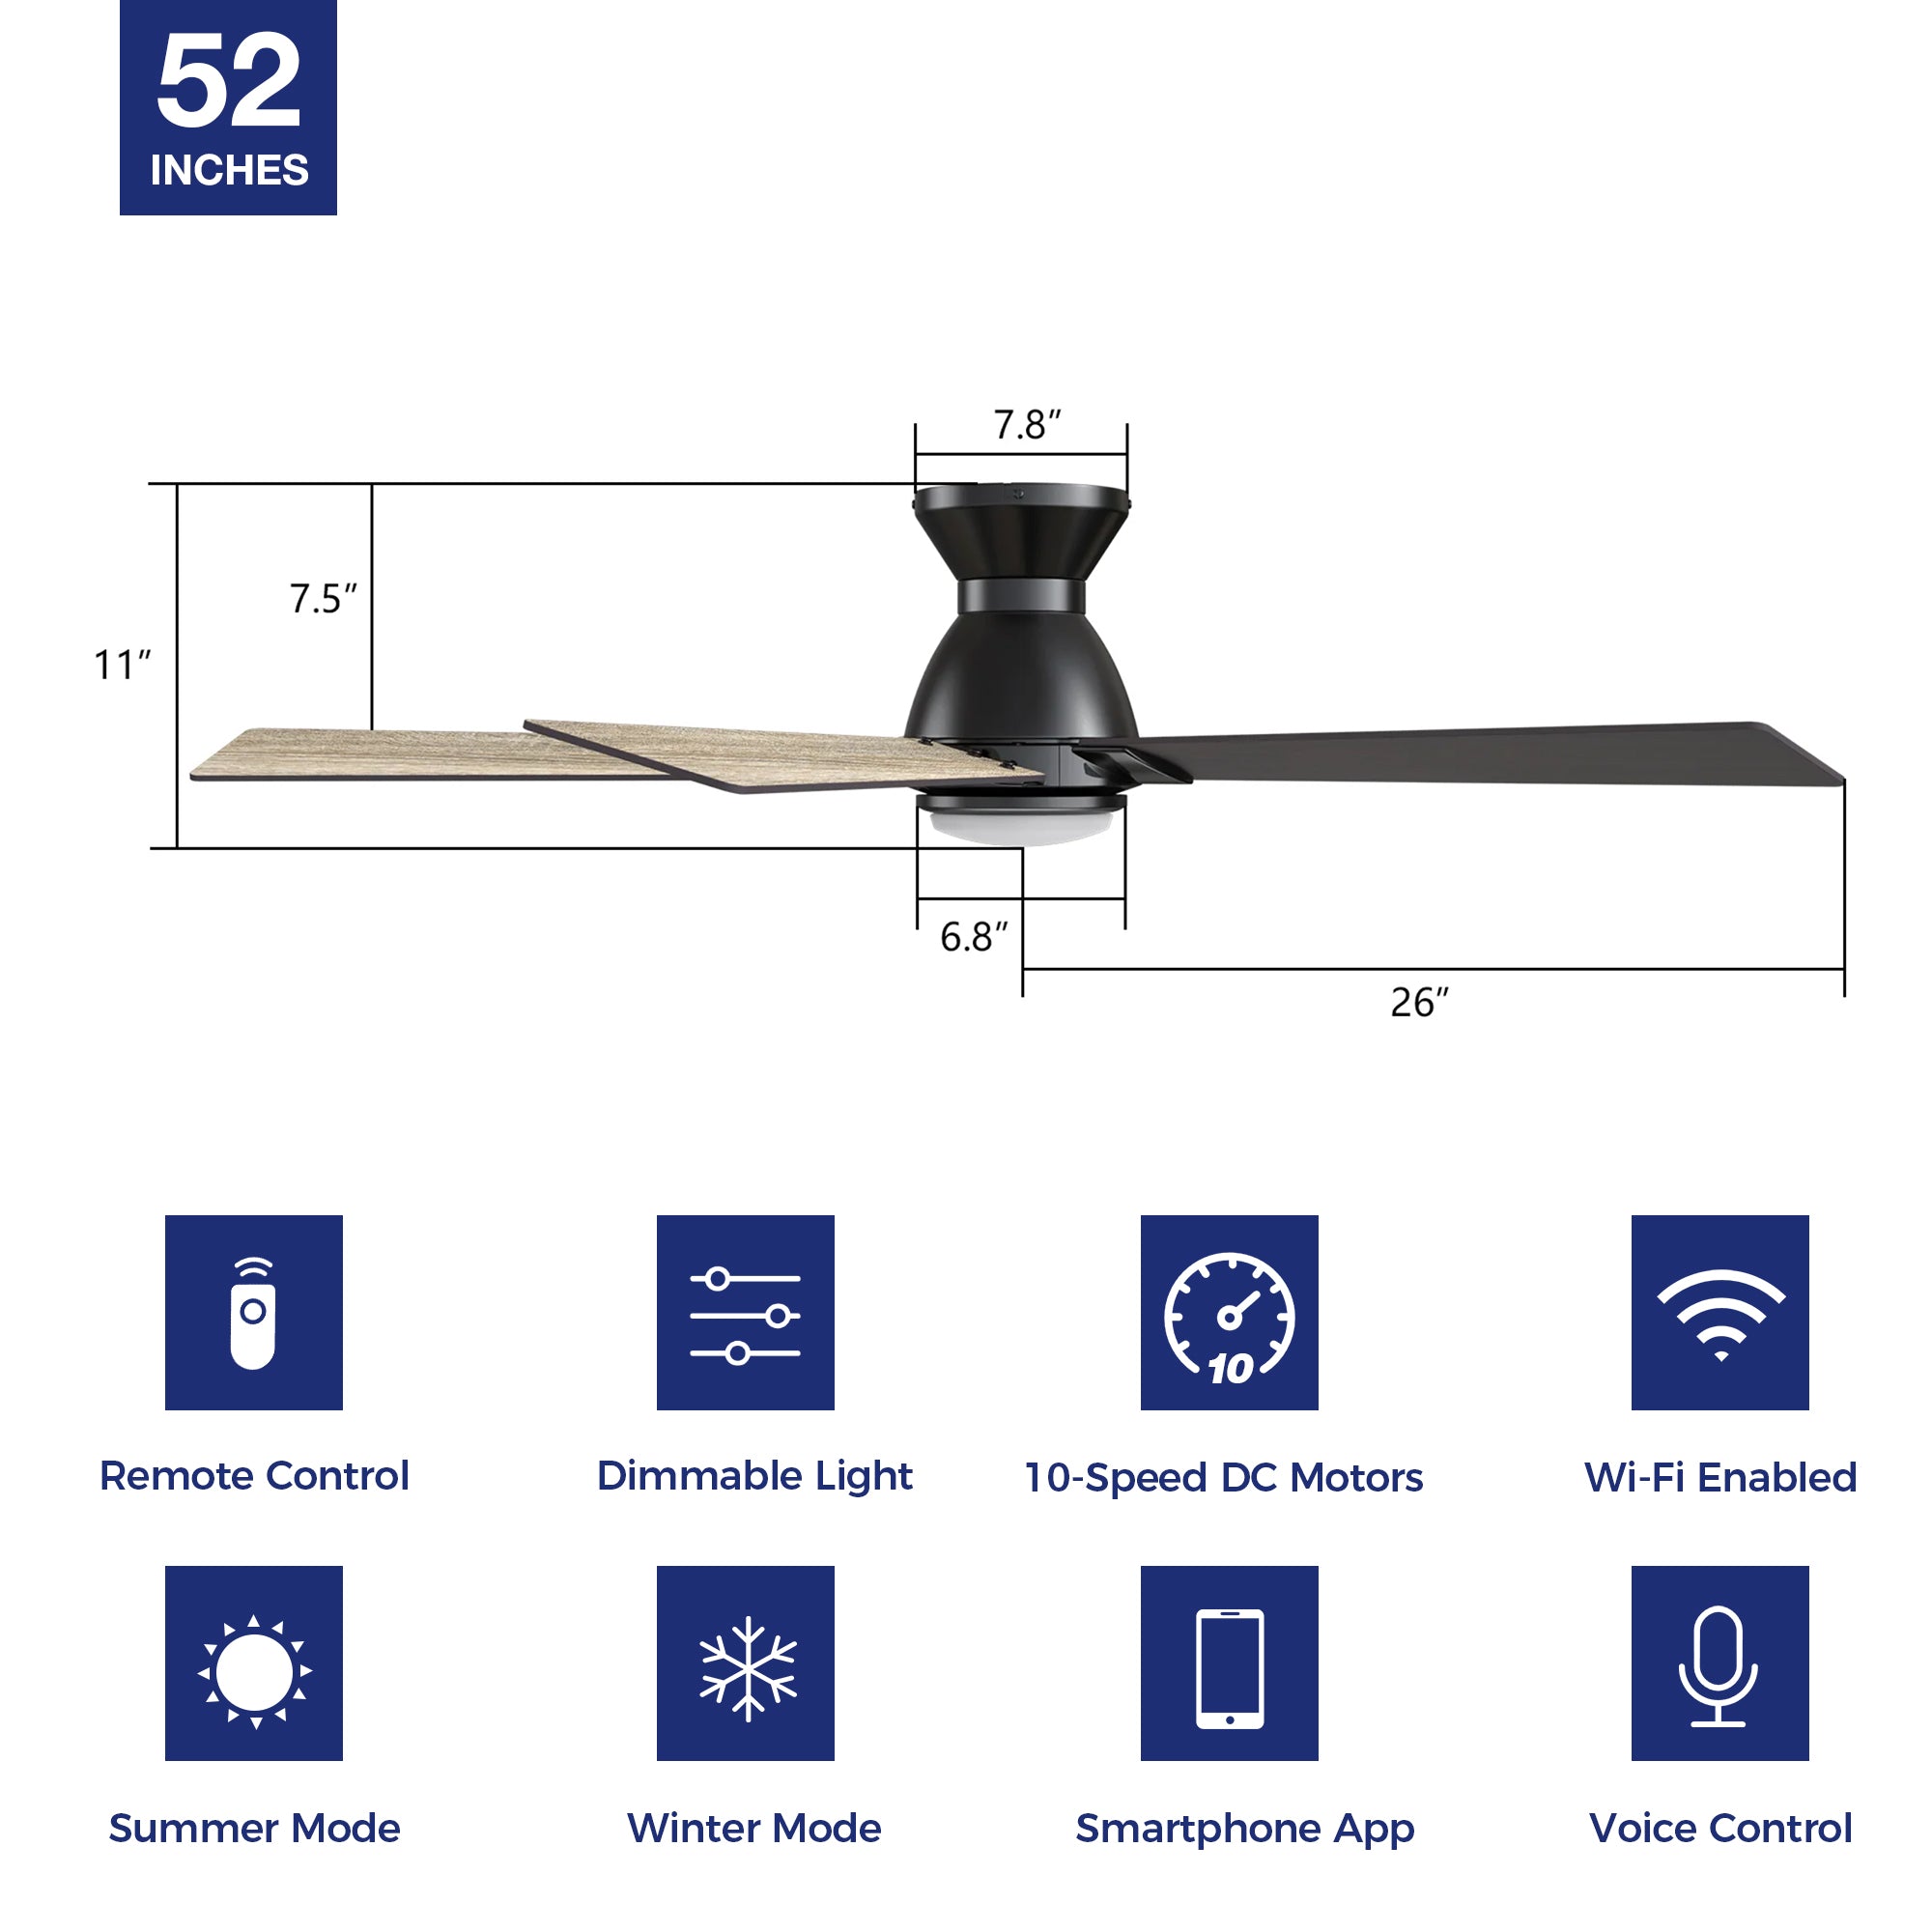 This Aspen 52&#39;&#39; smart ceiling fan keeps your space cool, bright, and stylish. It is a soft modern masterpiece perfect for your large indoor living spaces. This Wifi smart ceiling fan is a simplicity designing with Black finish, use elegant Plywood blades and has an integrated 4000K LED cool light. The fan features Remote control, Wi-Fi apps, Siri Shortcut and Voice control technology (compatible with Amazon Alexa and Google Home Assistant ) to set fan preferences. 